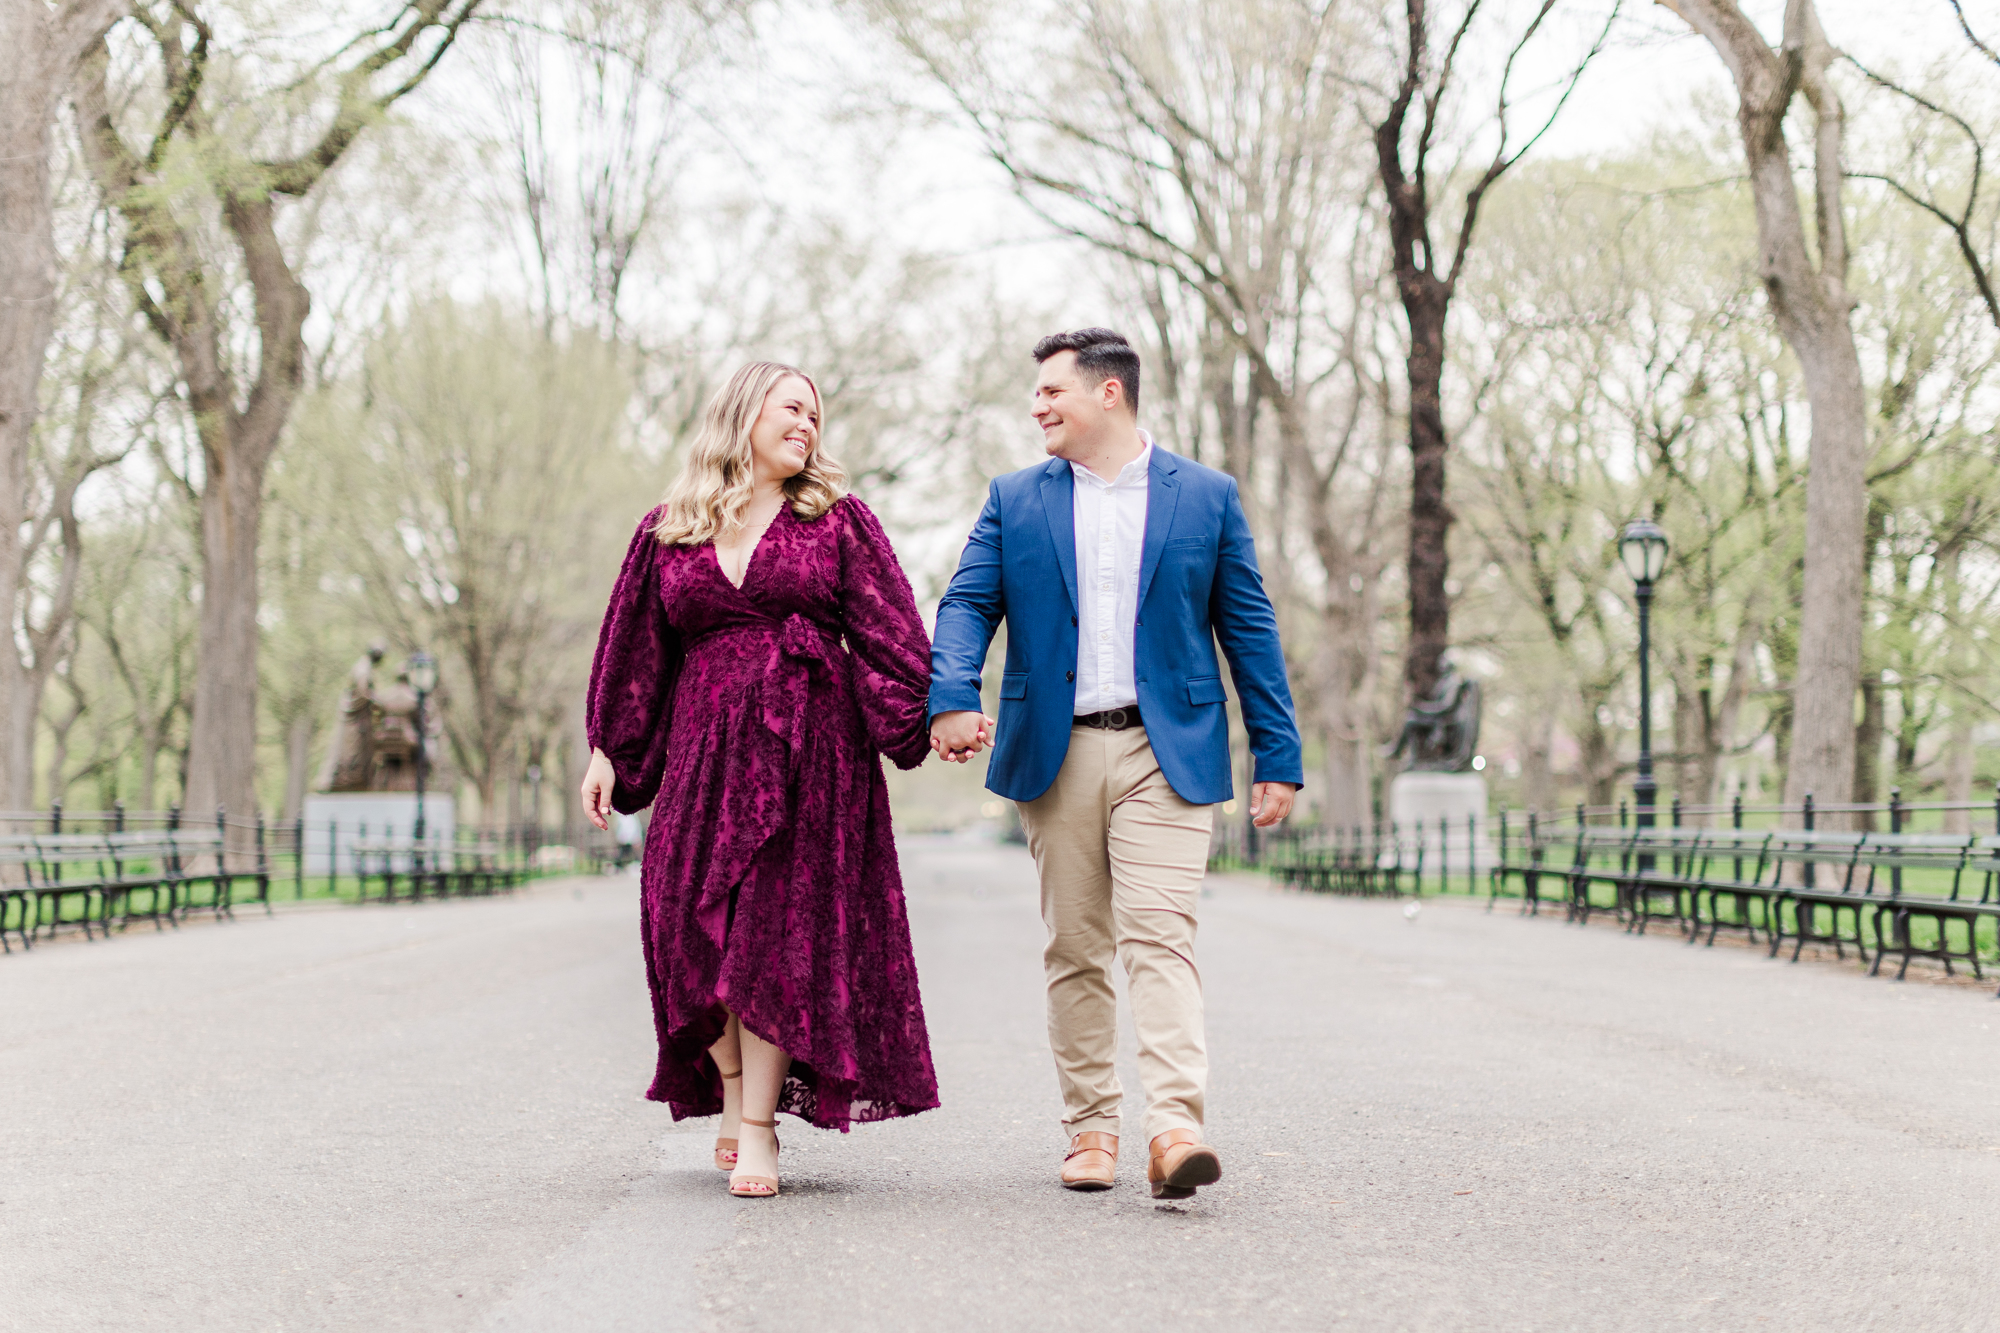 Radiant Engagement Pictures in Central Park